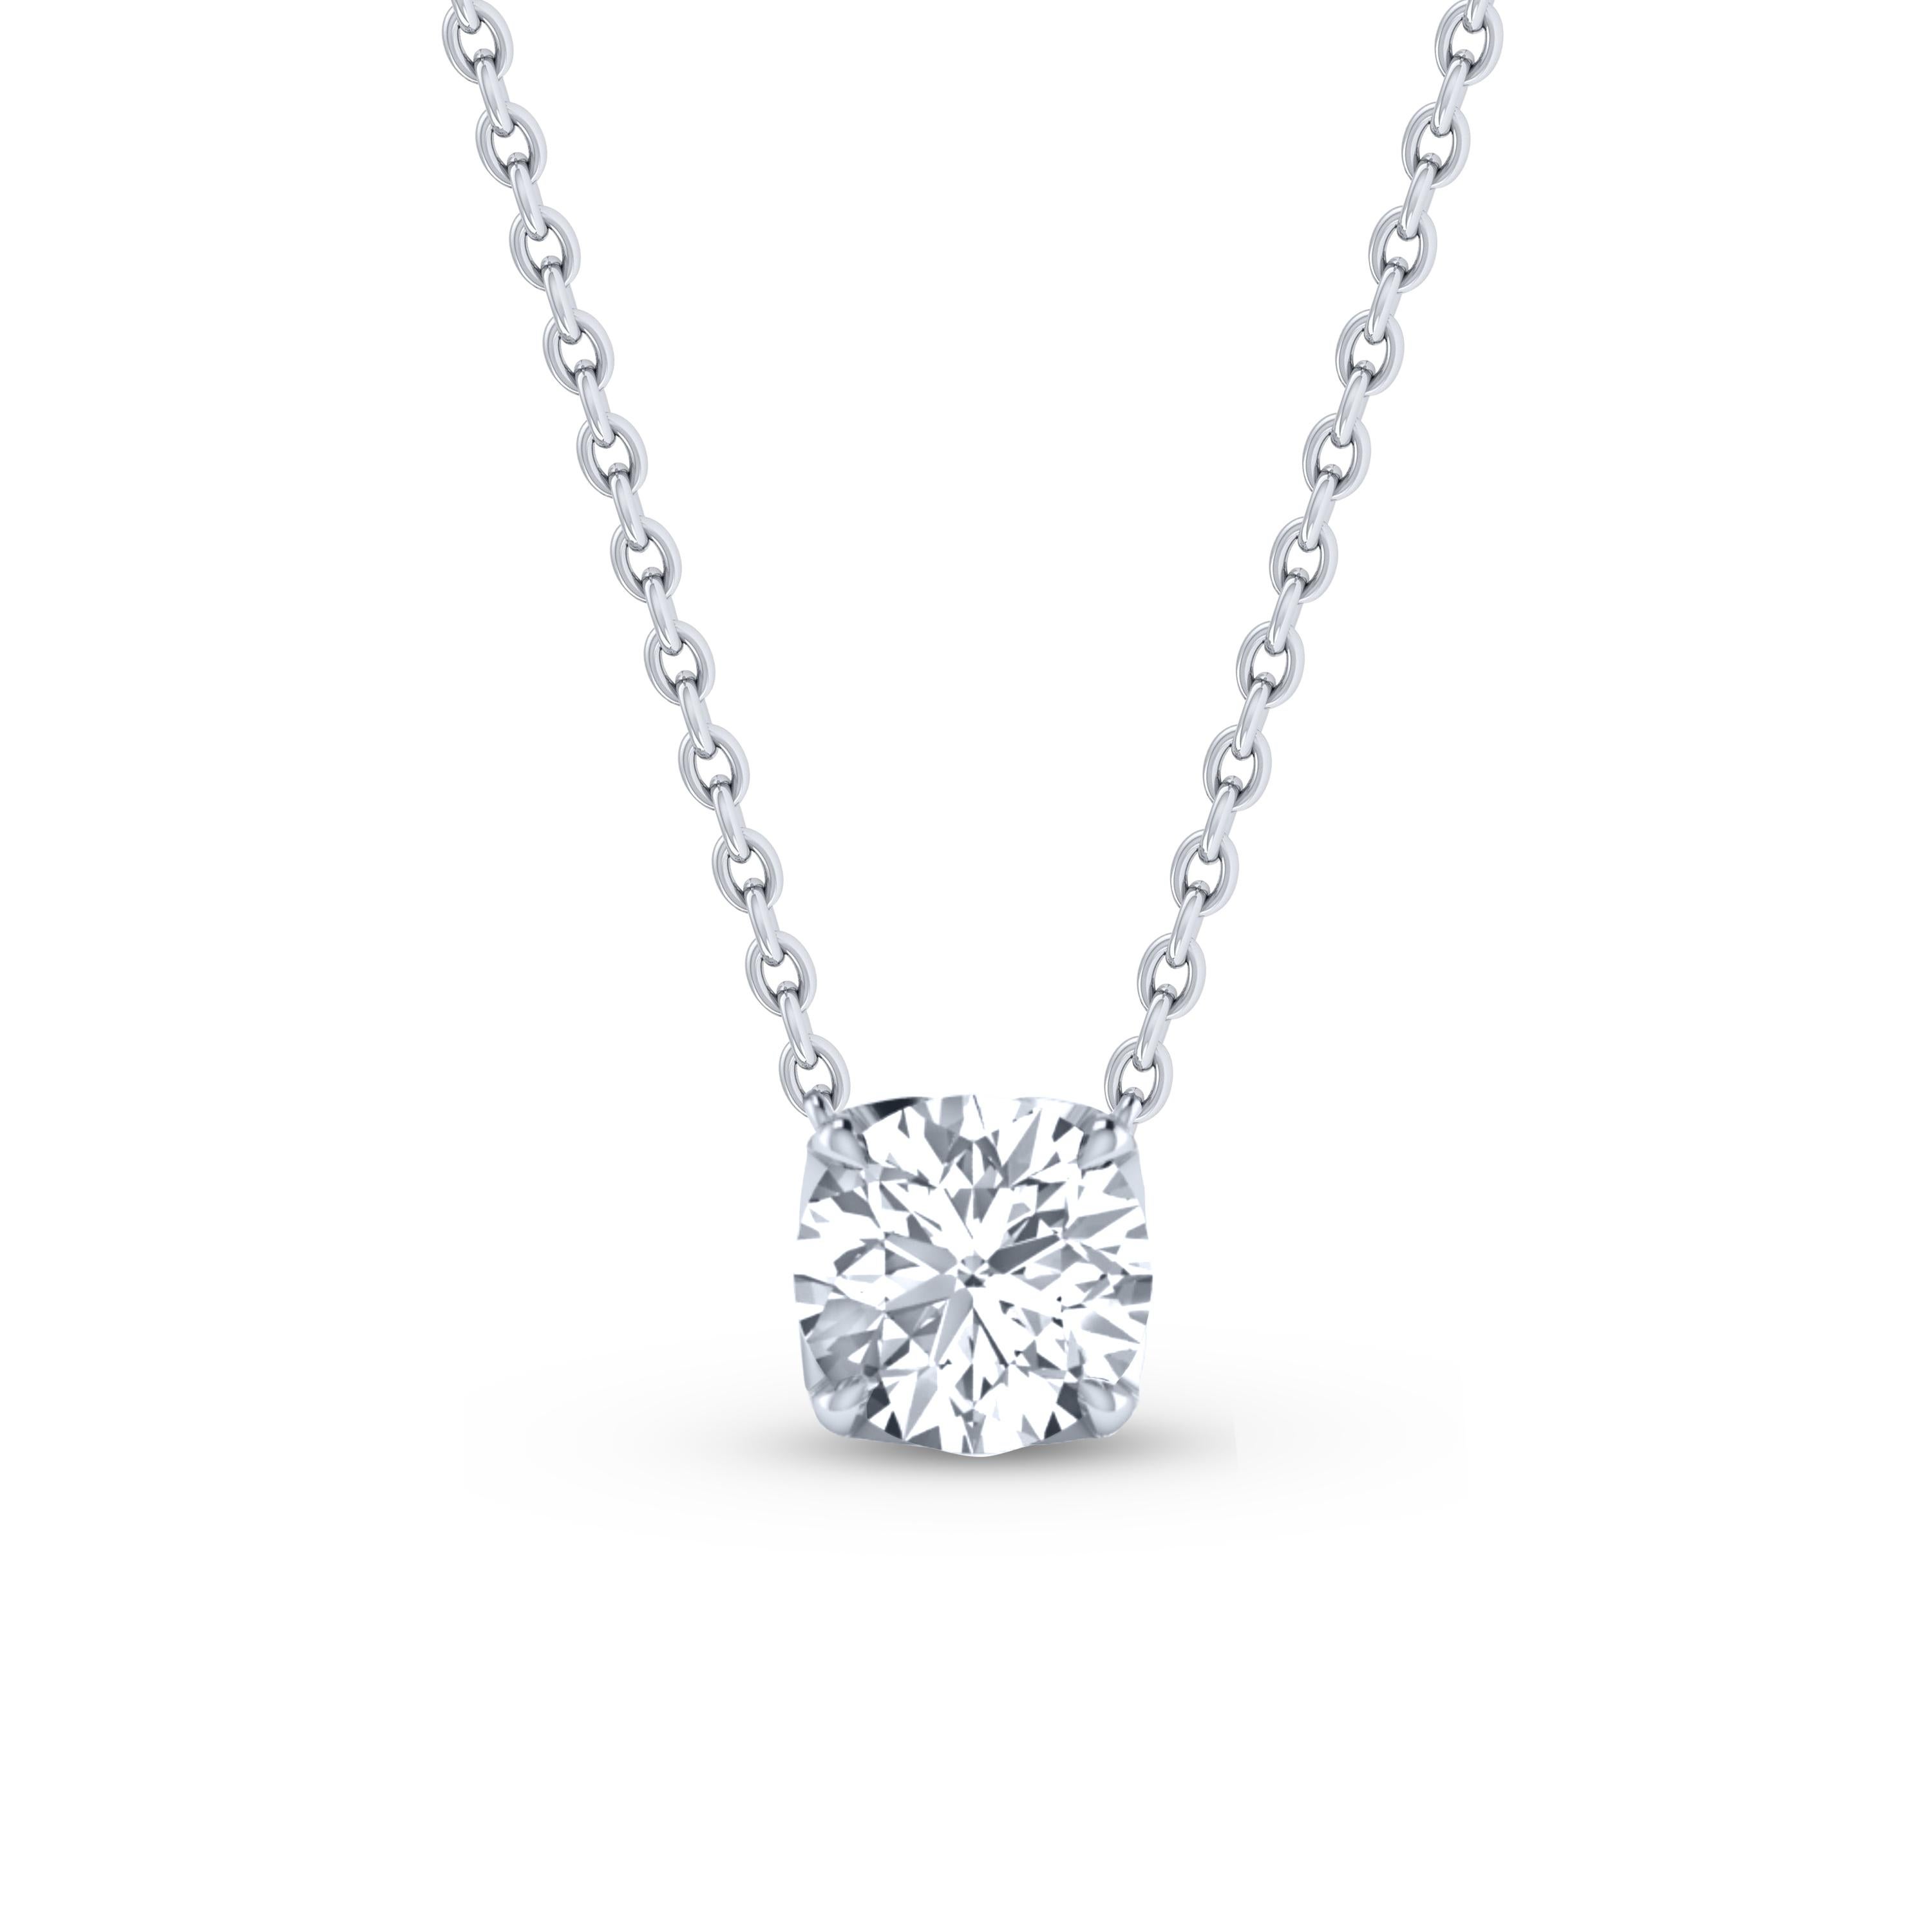  This solitaire diamond necklace features a single, brilliant-cut 0.34 carat diamond in prong setting crafted in 18 KT white gold. This elegant necklace includes a 20-inch cable chain with extender at 18-inch.

(Carat weights may vary slightly due